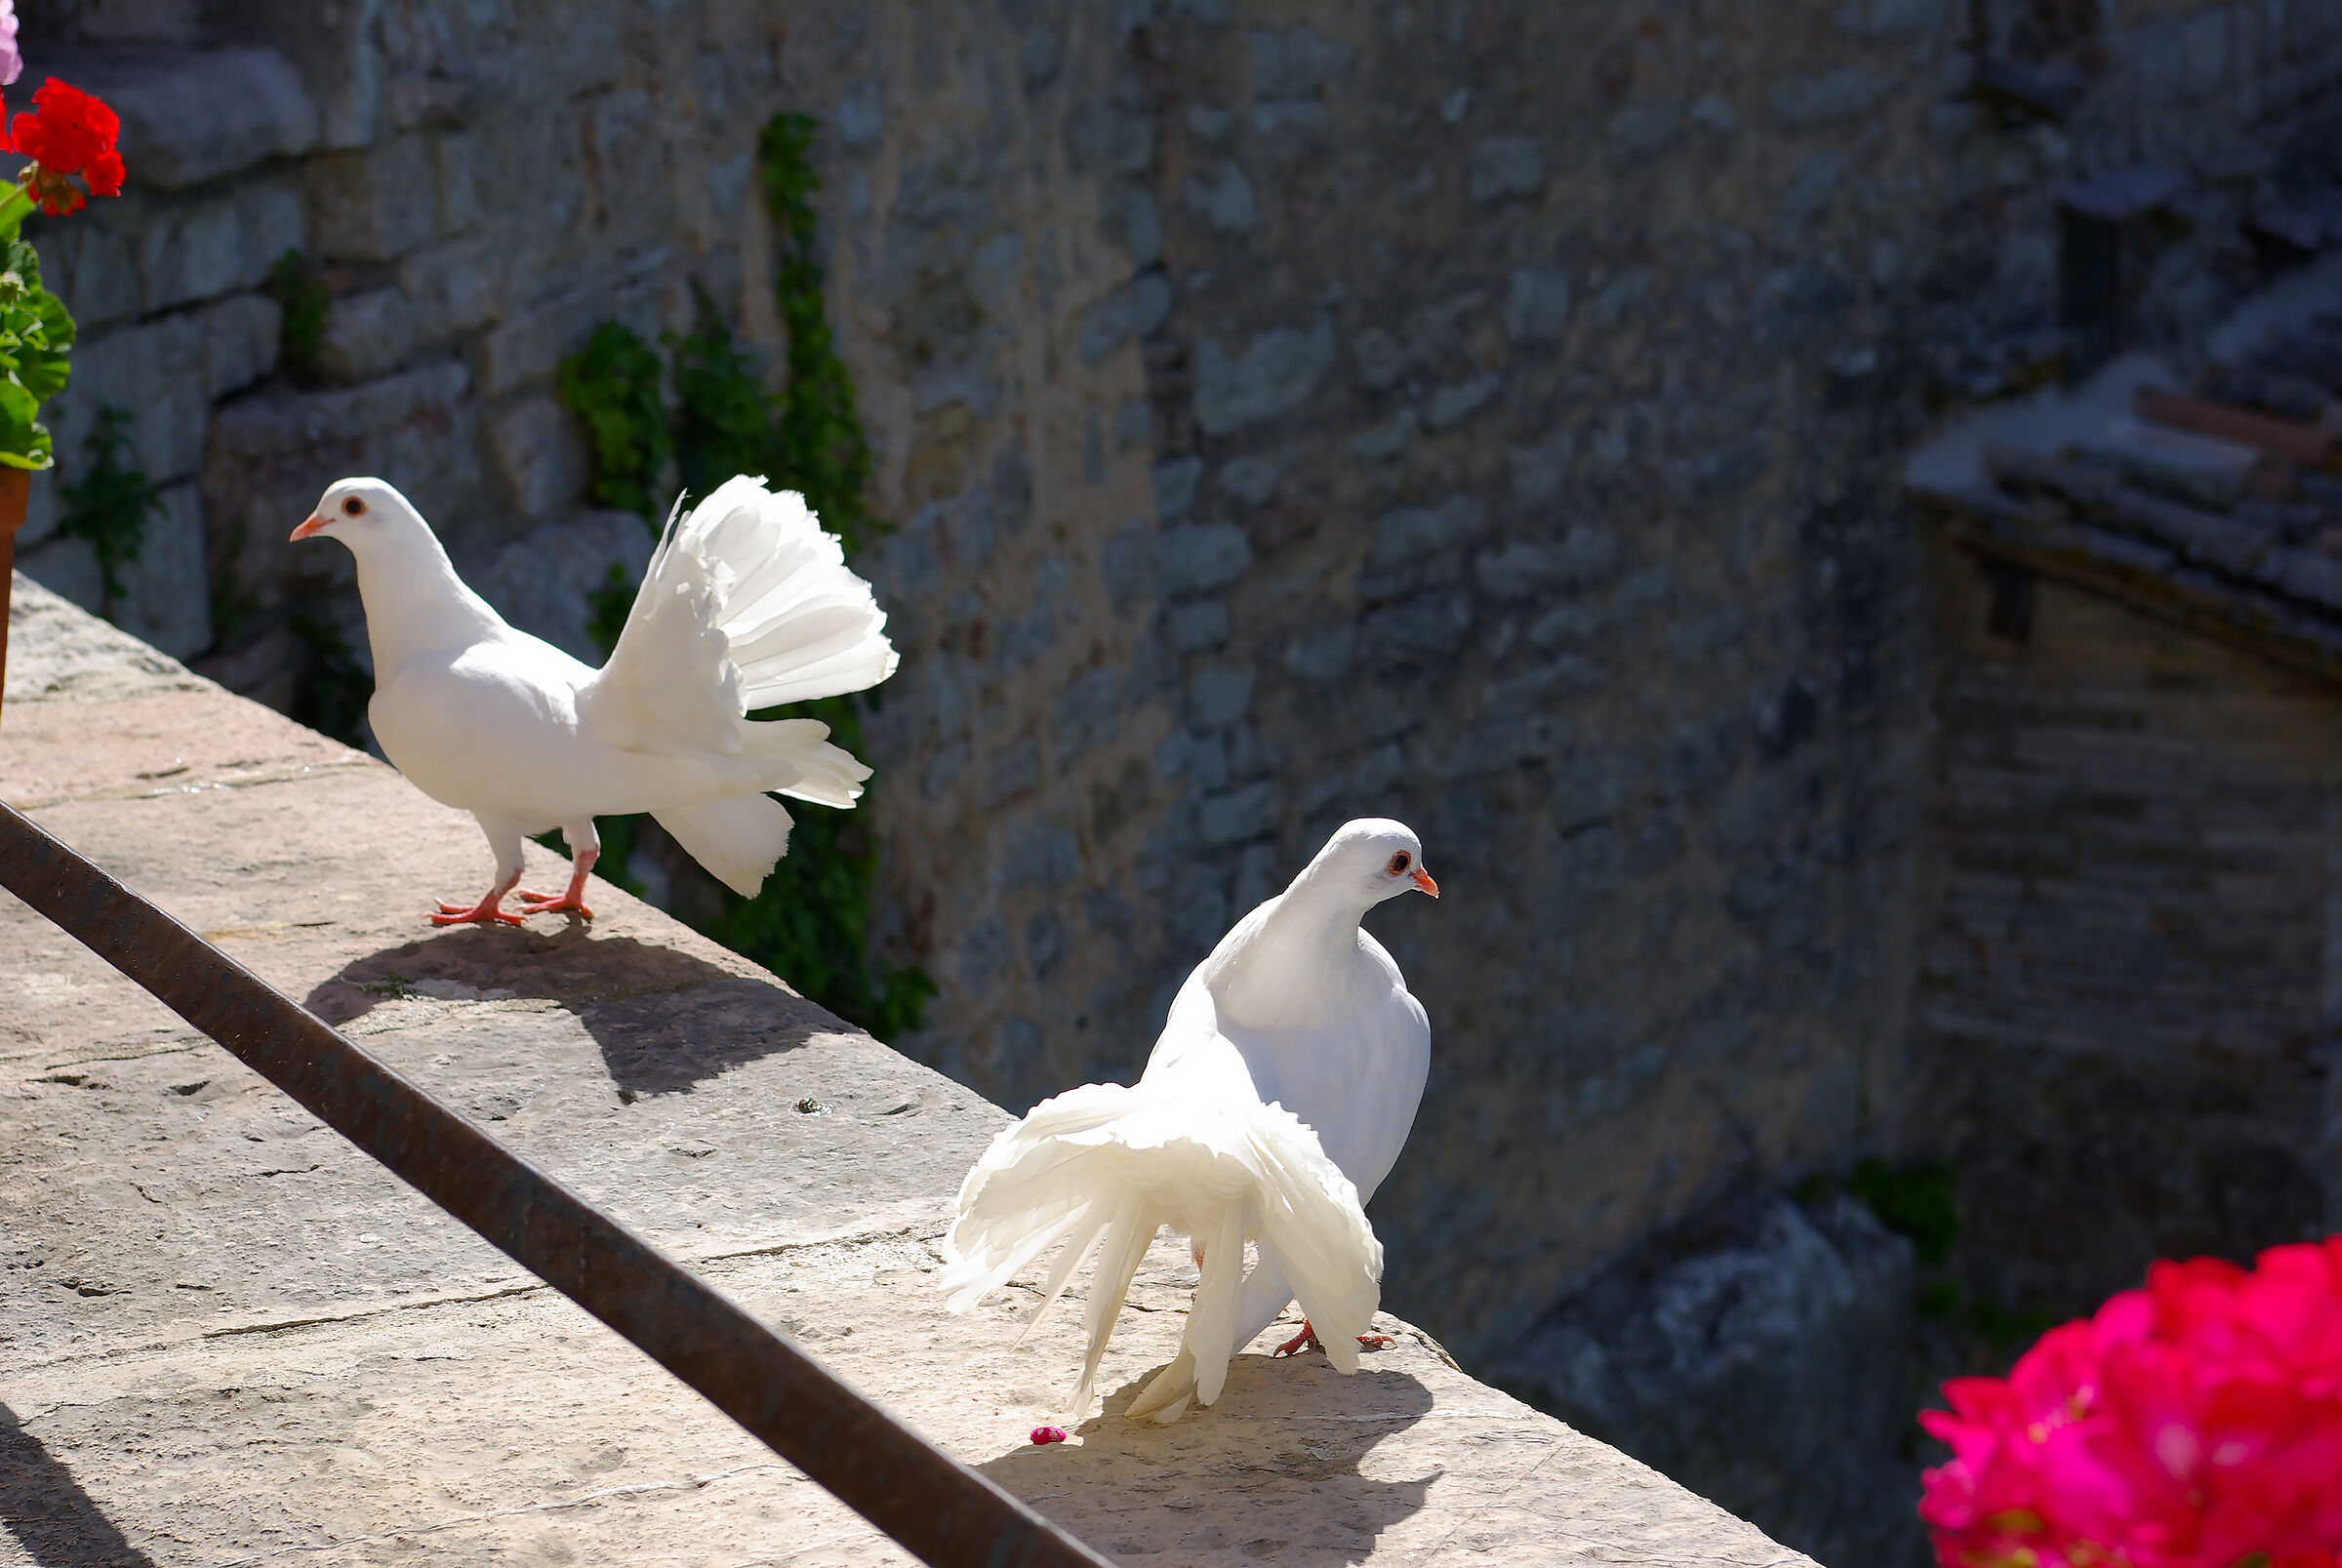 The greeting of the doves...